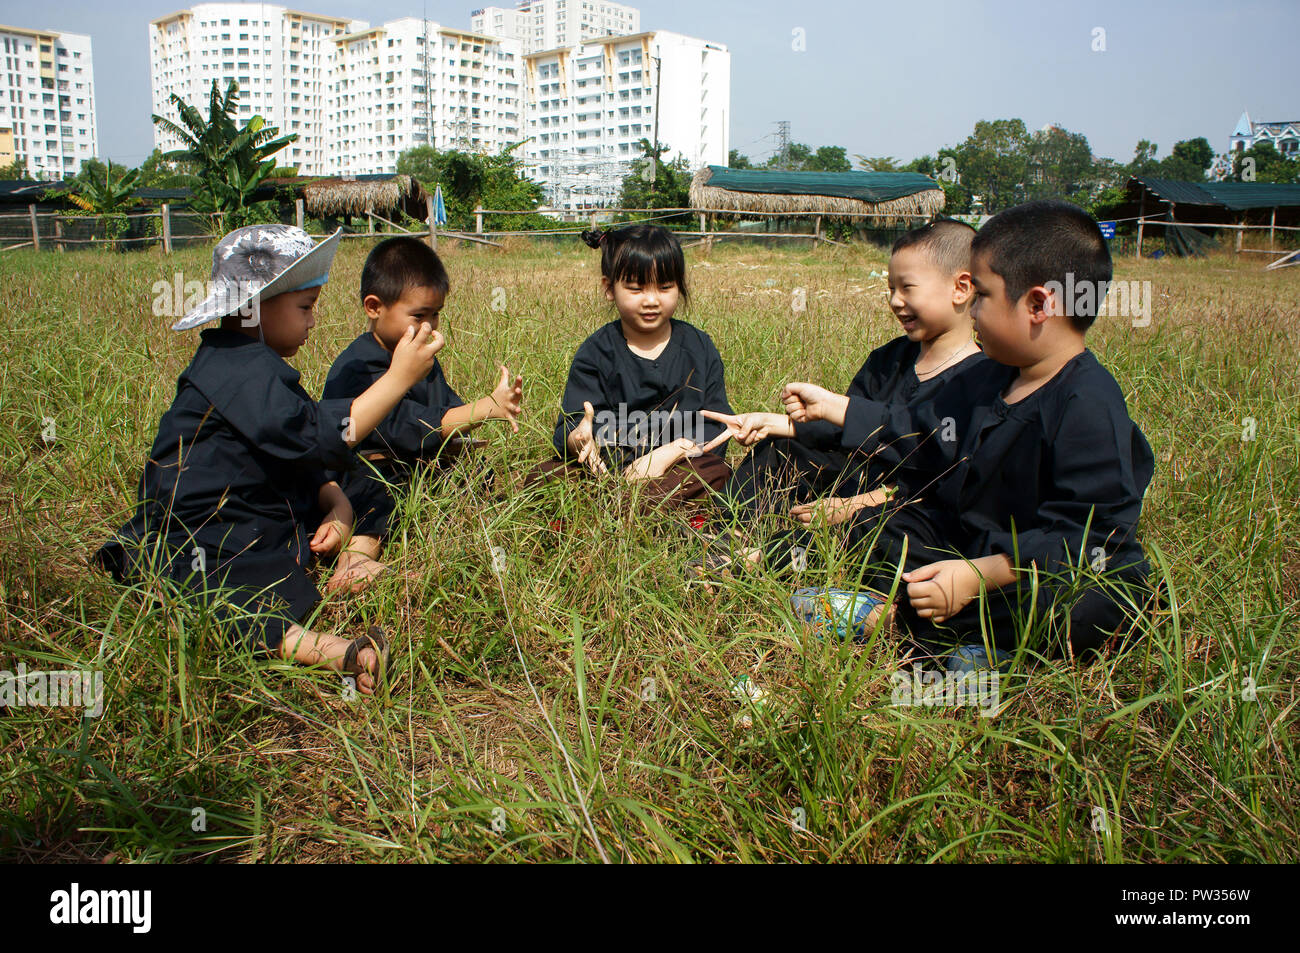 HO CHI MINH CITY, VIET NAM, Group of Vietnamese children in black traditional dress, sit on grassland and play together, outdoor activity Stock Photo